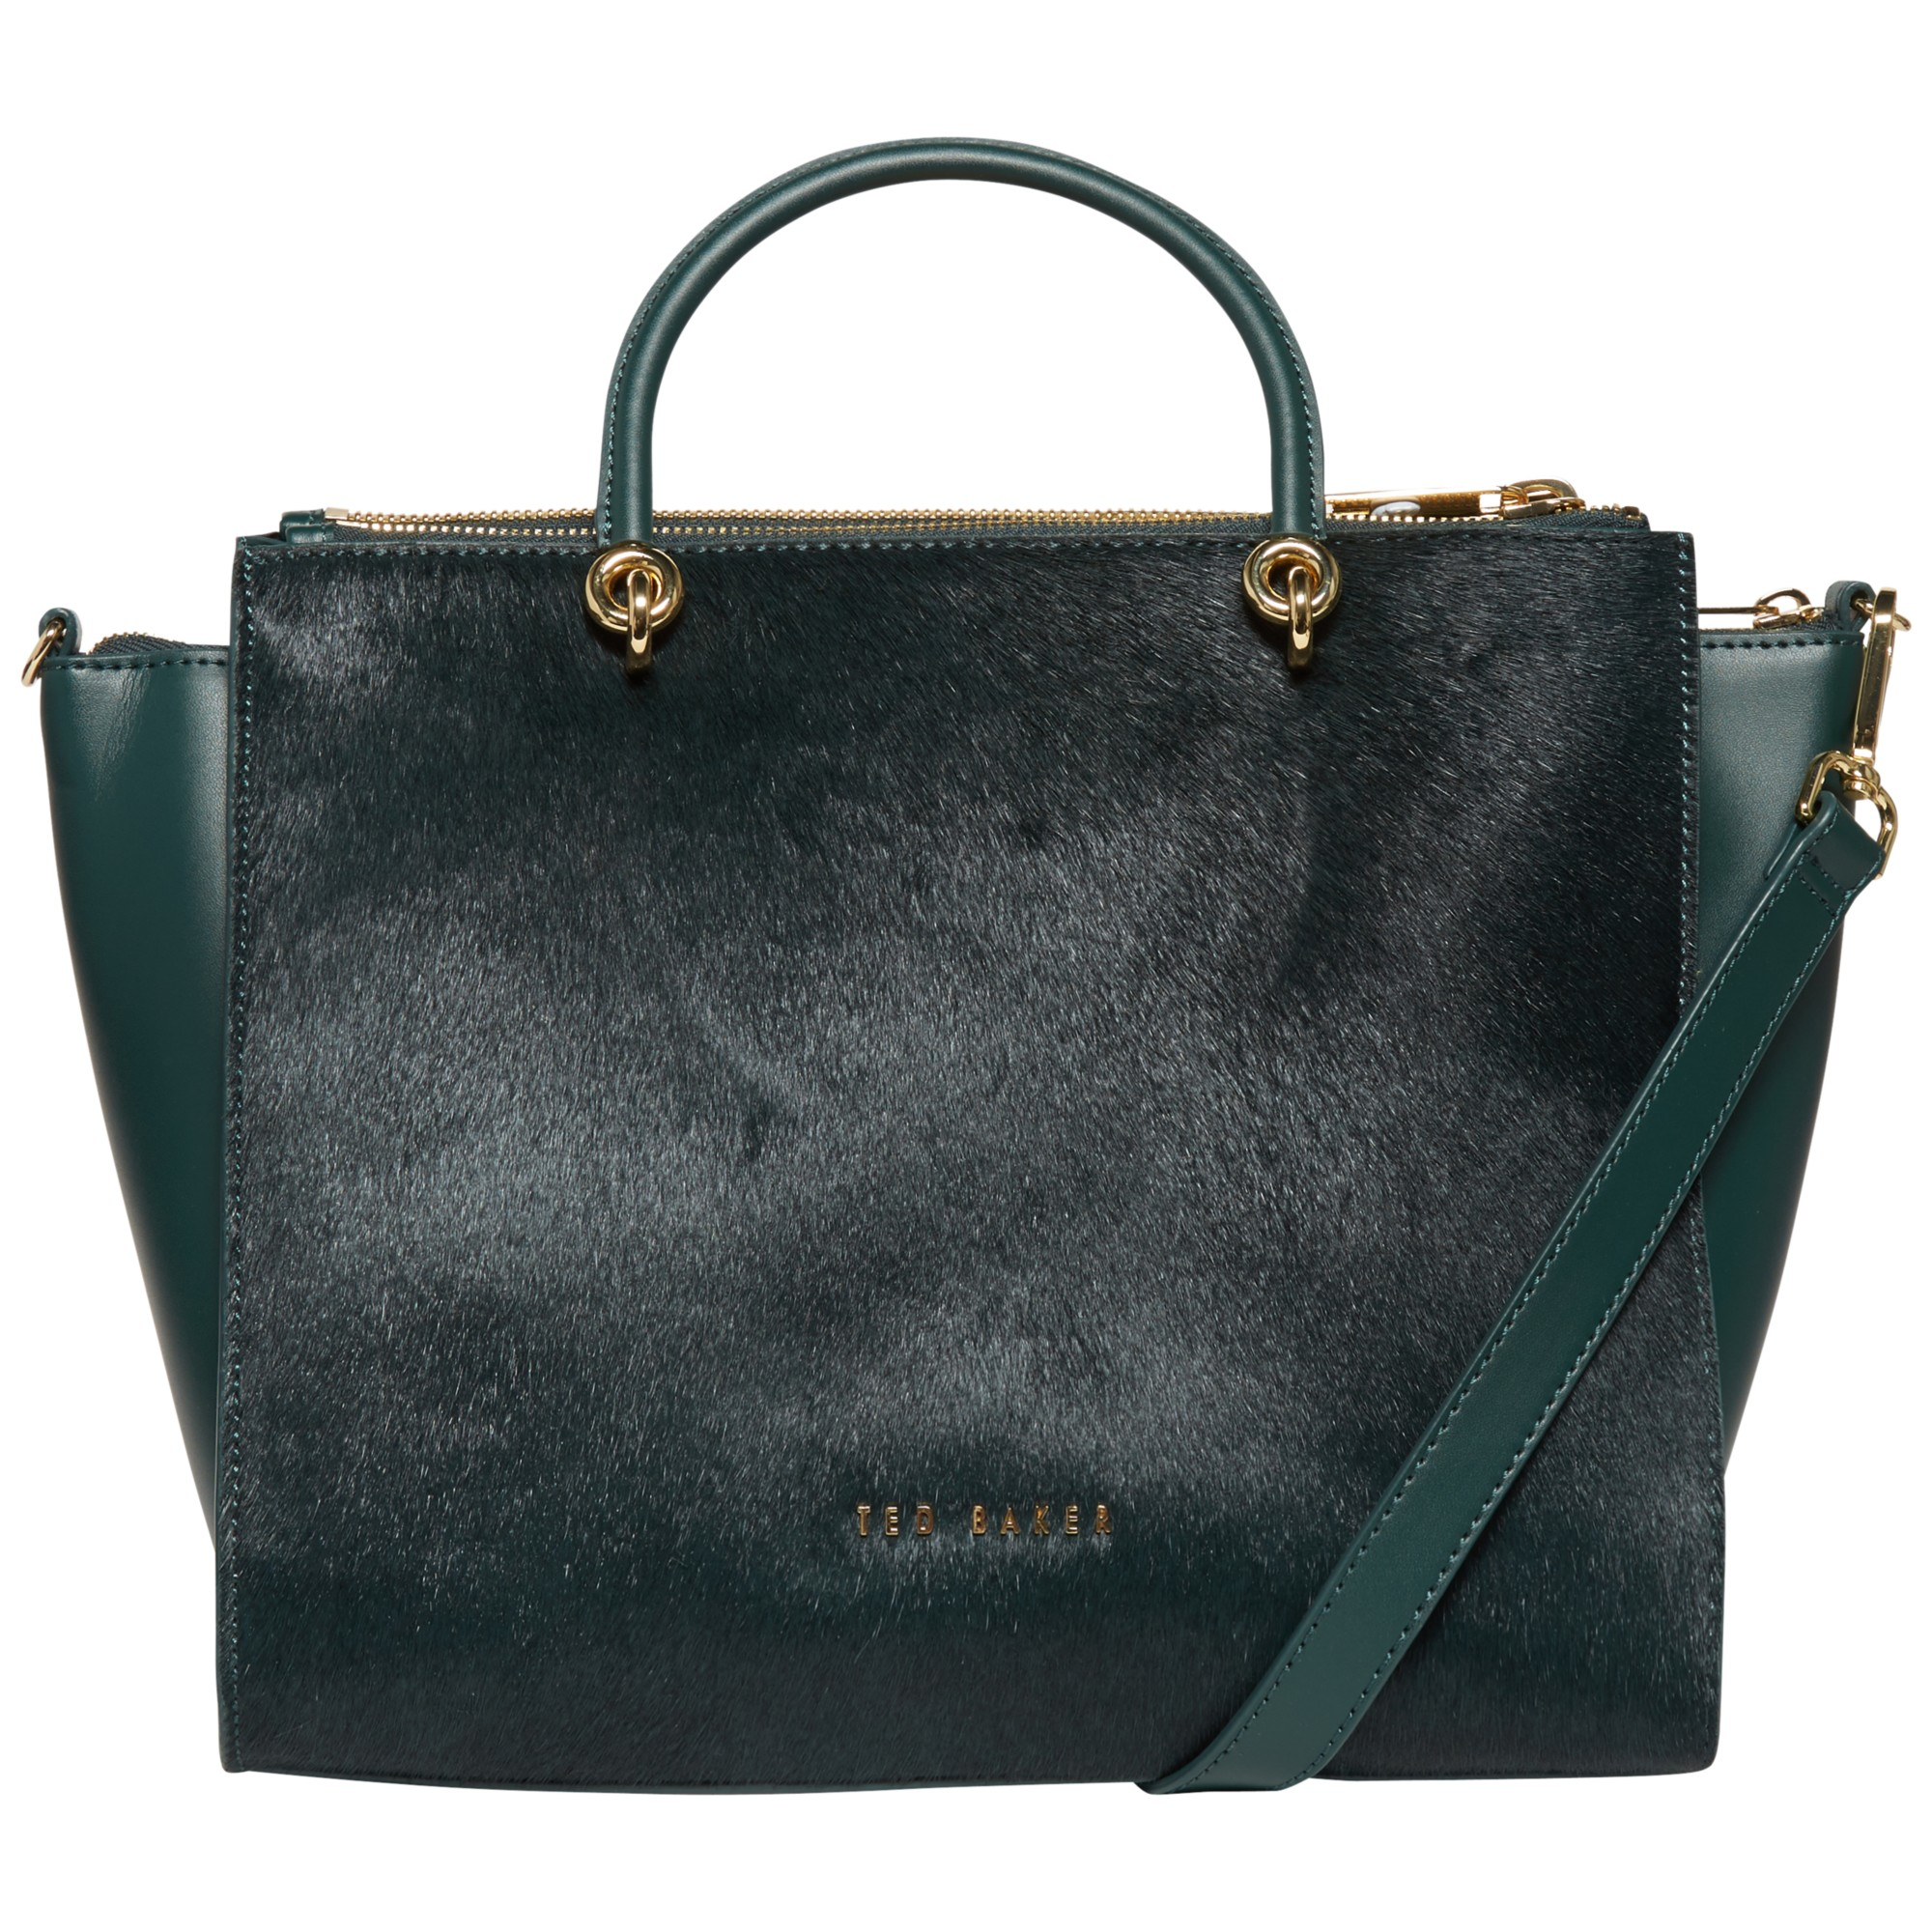 Ted baker Louisa Large Leather Cross Body Tote Bag in Green (Dark Green ...